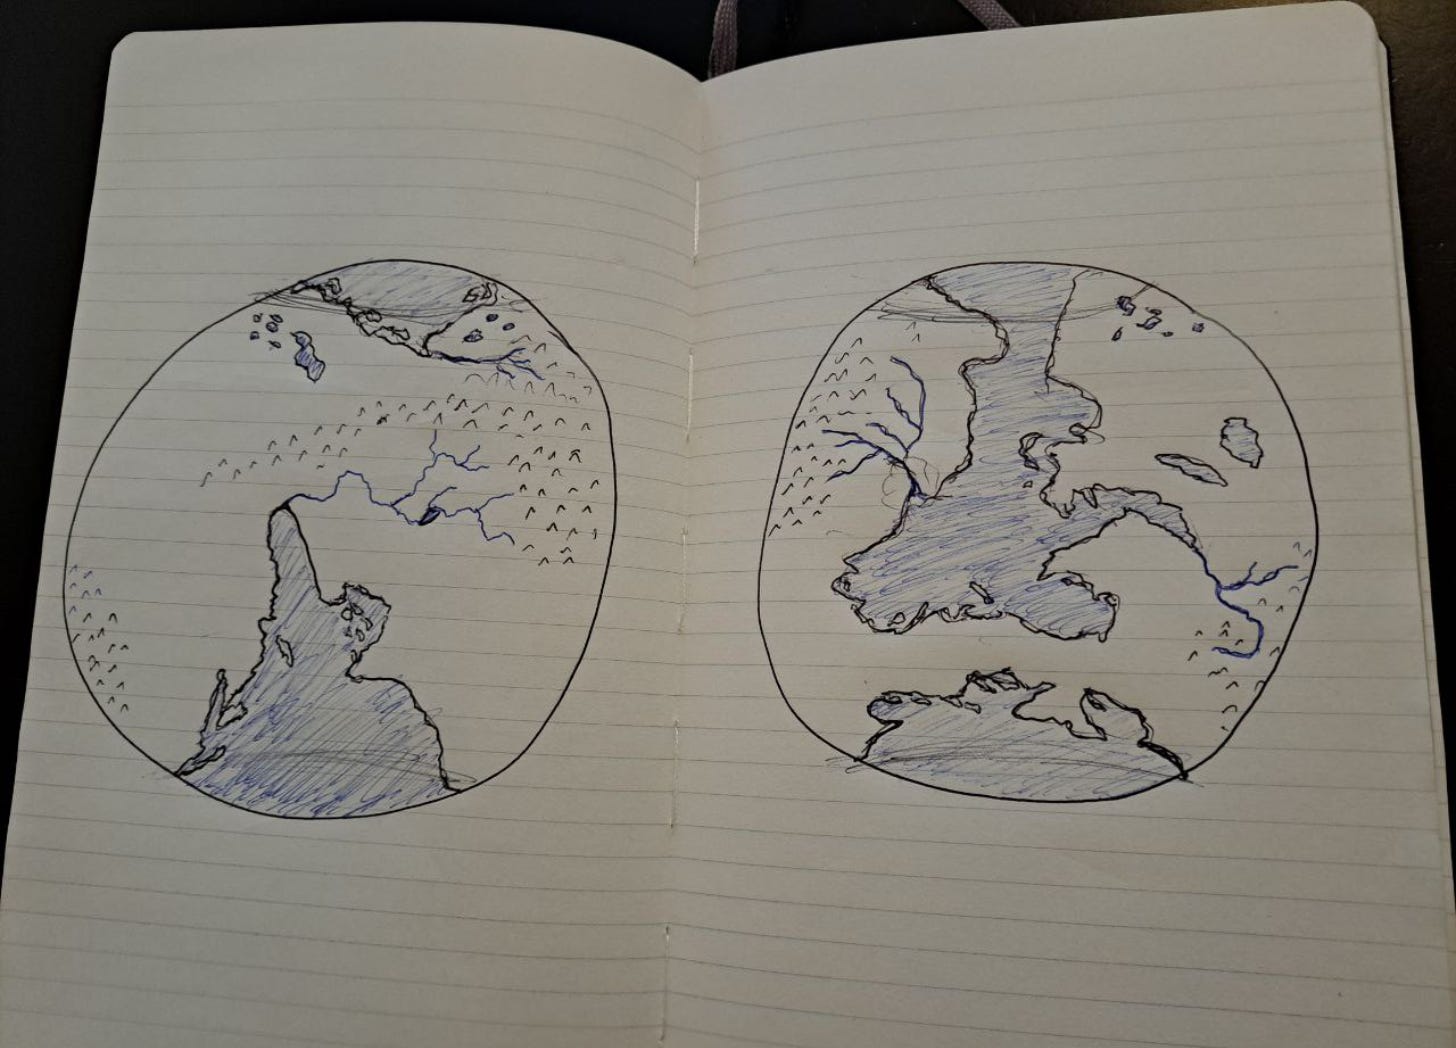 A sketch of two hemispheres of a planet. Notably, it's one continent with two major landbridges connecting the main land masses.